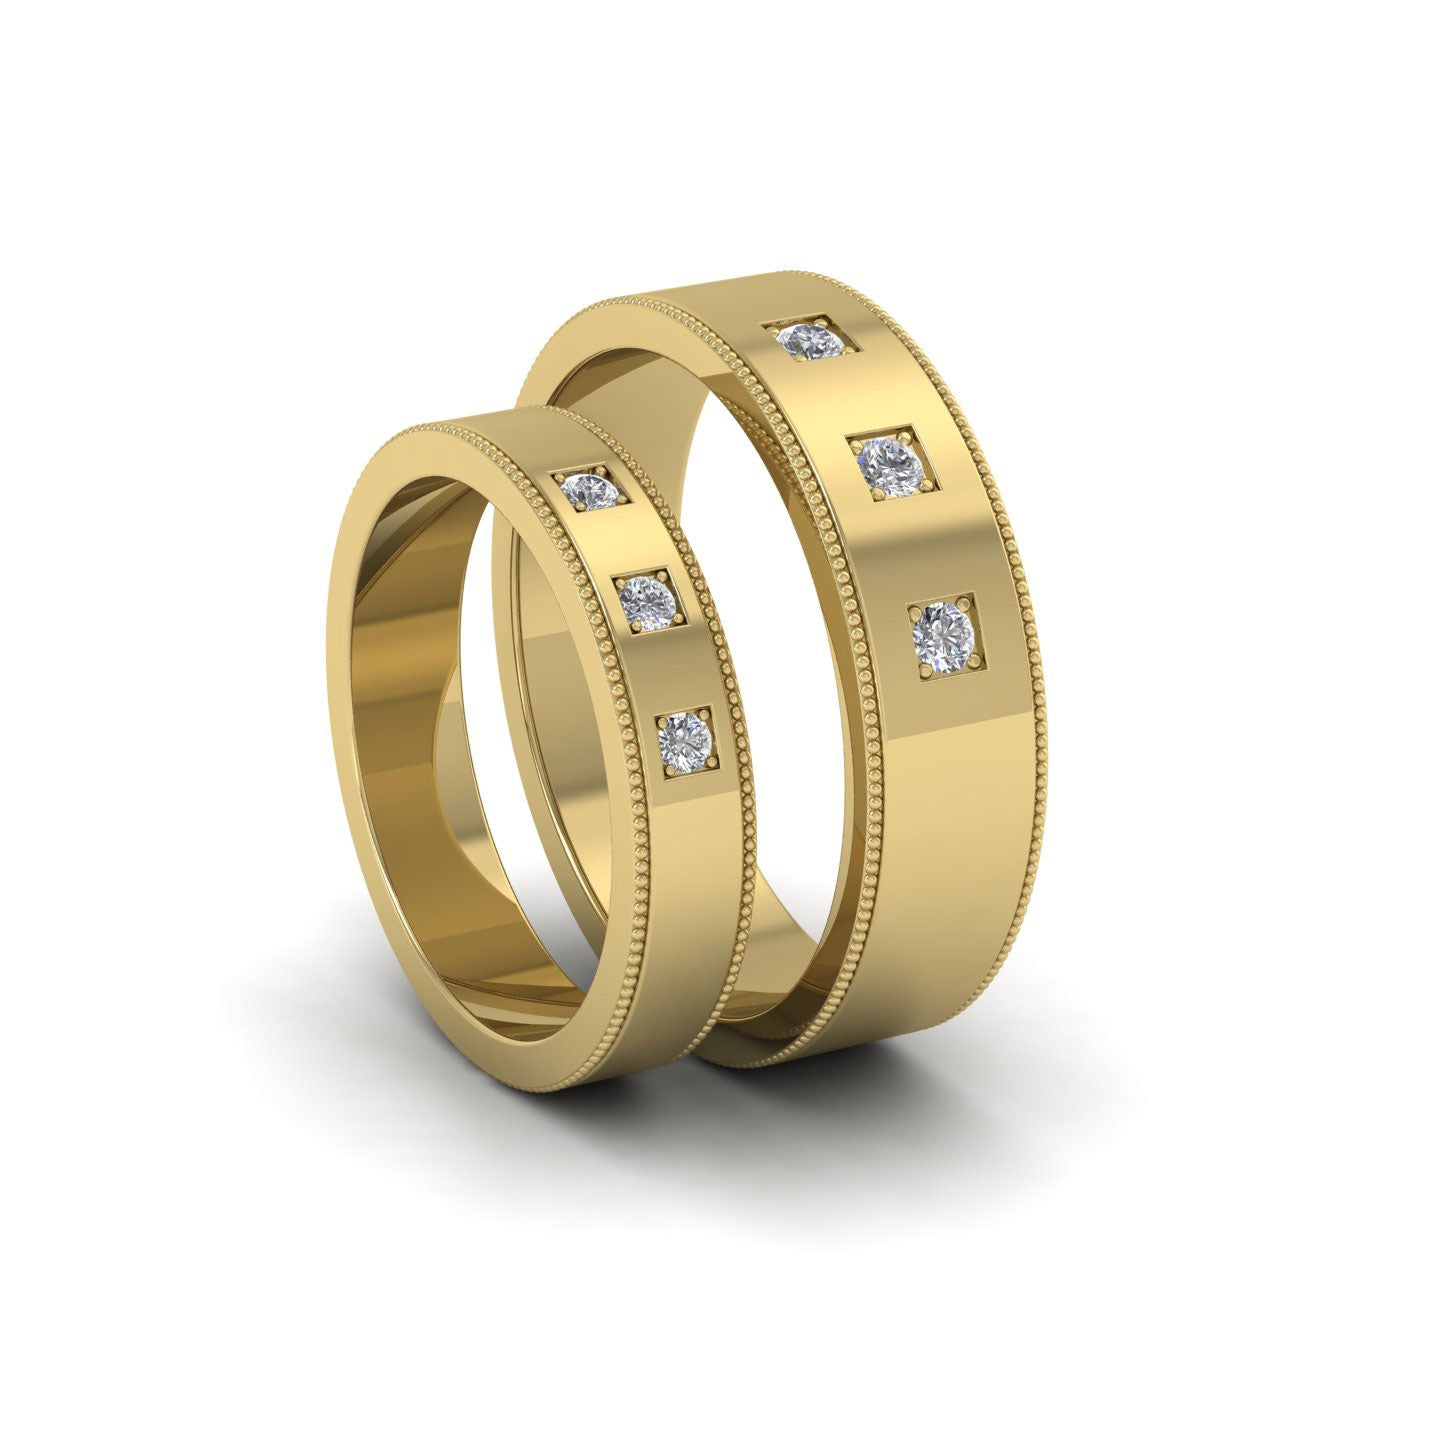 Three Diamonds With Square Setting 9ct Yellow Gold 4mm Wedding Ring With Millgrain Edge